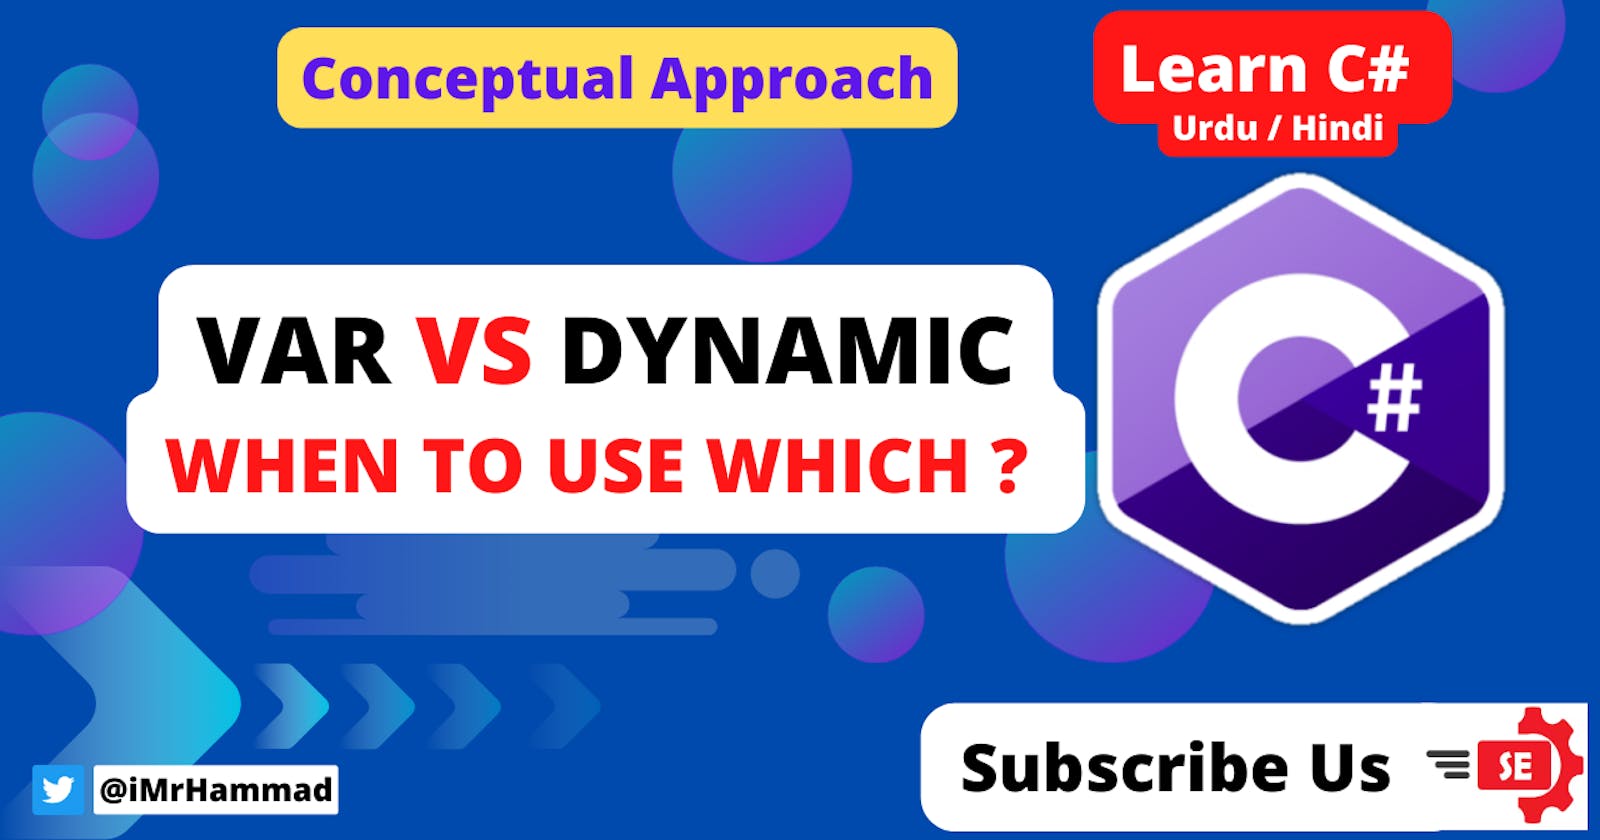 "var" vs "dynamic" when to use which one?